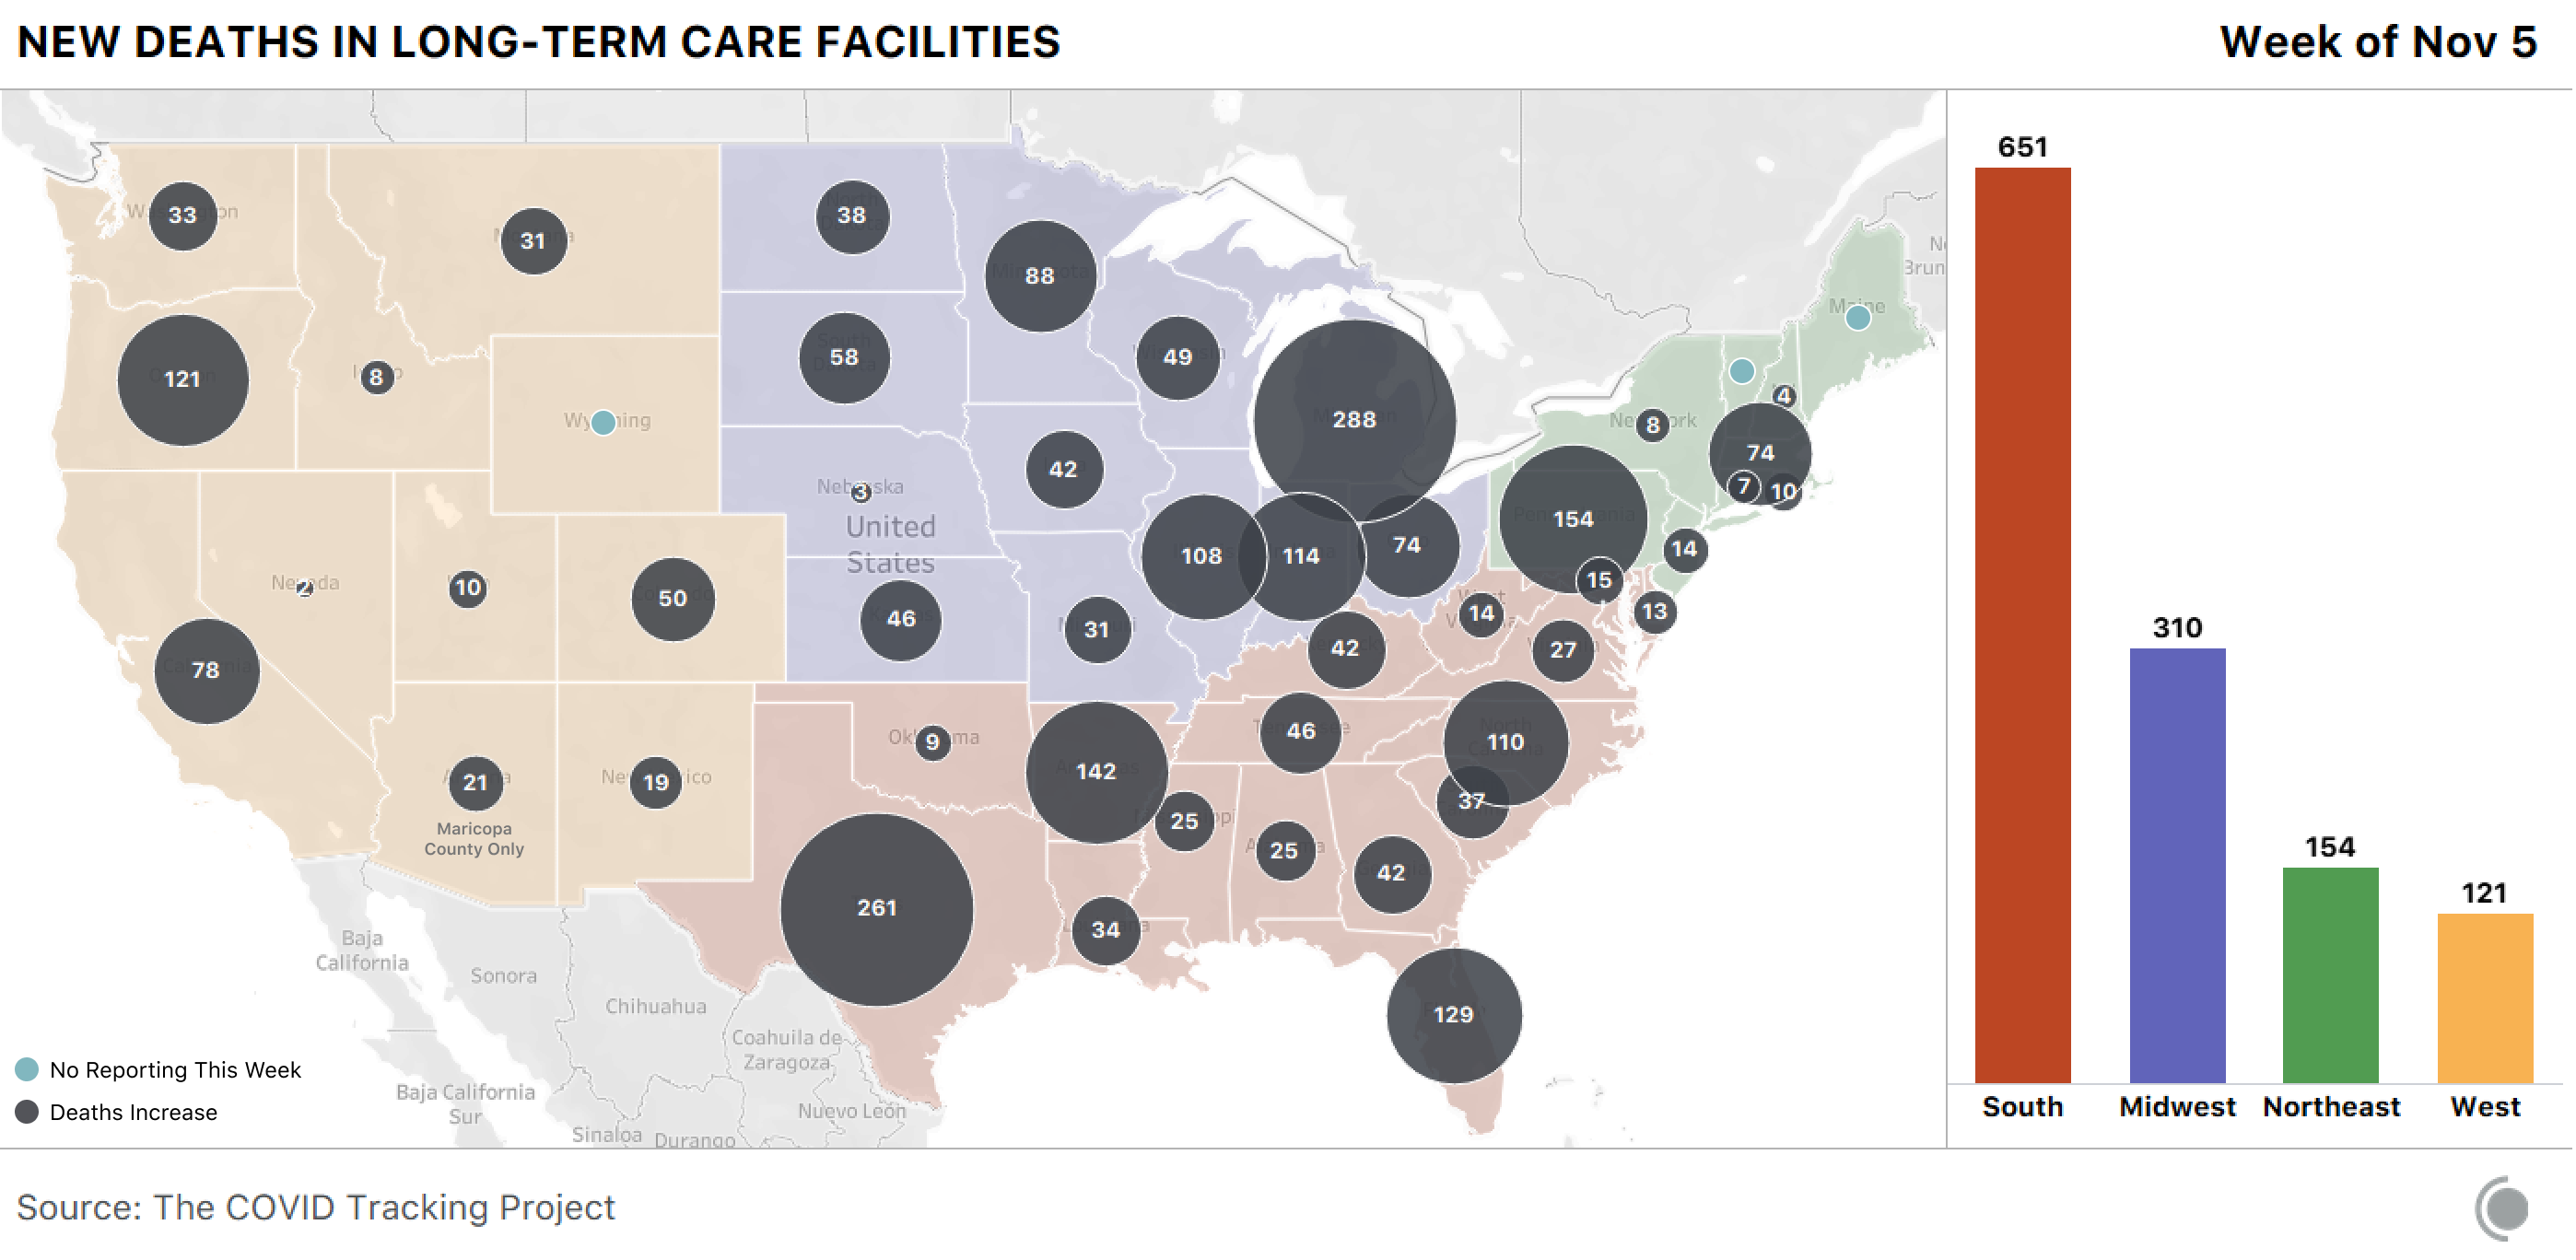 Map of the US showing new deaths in LTC facilities this week. Michigan saw the most deaths with 288. Most deaths are occurring in the South and Midwest.